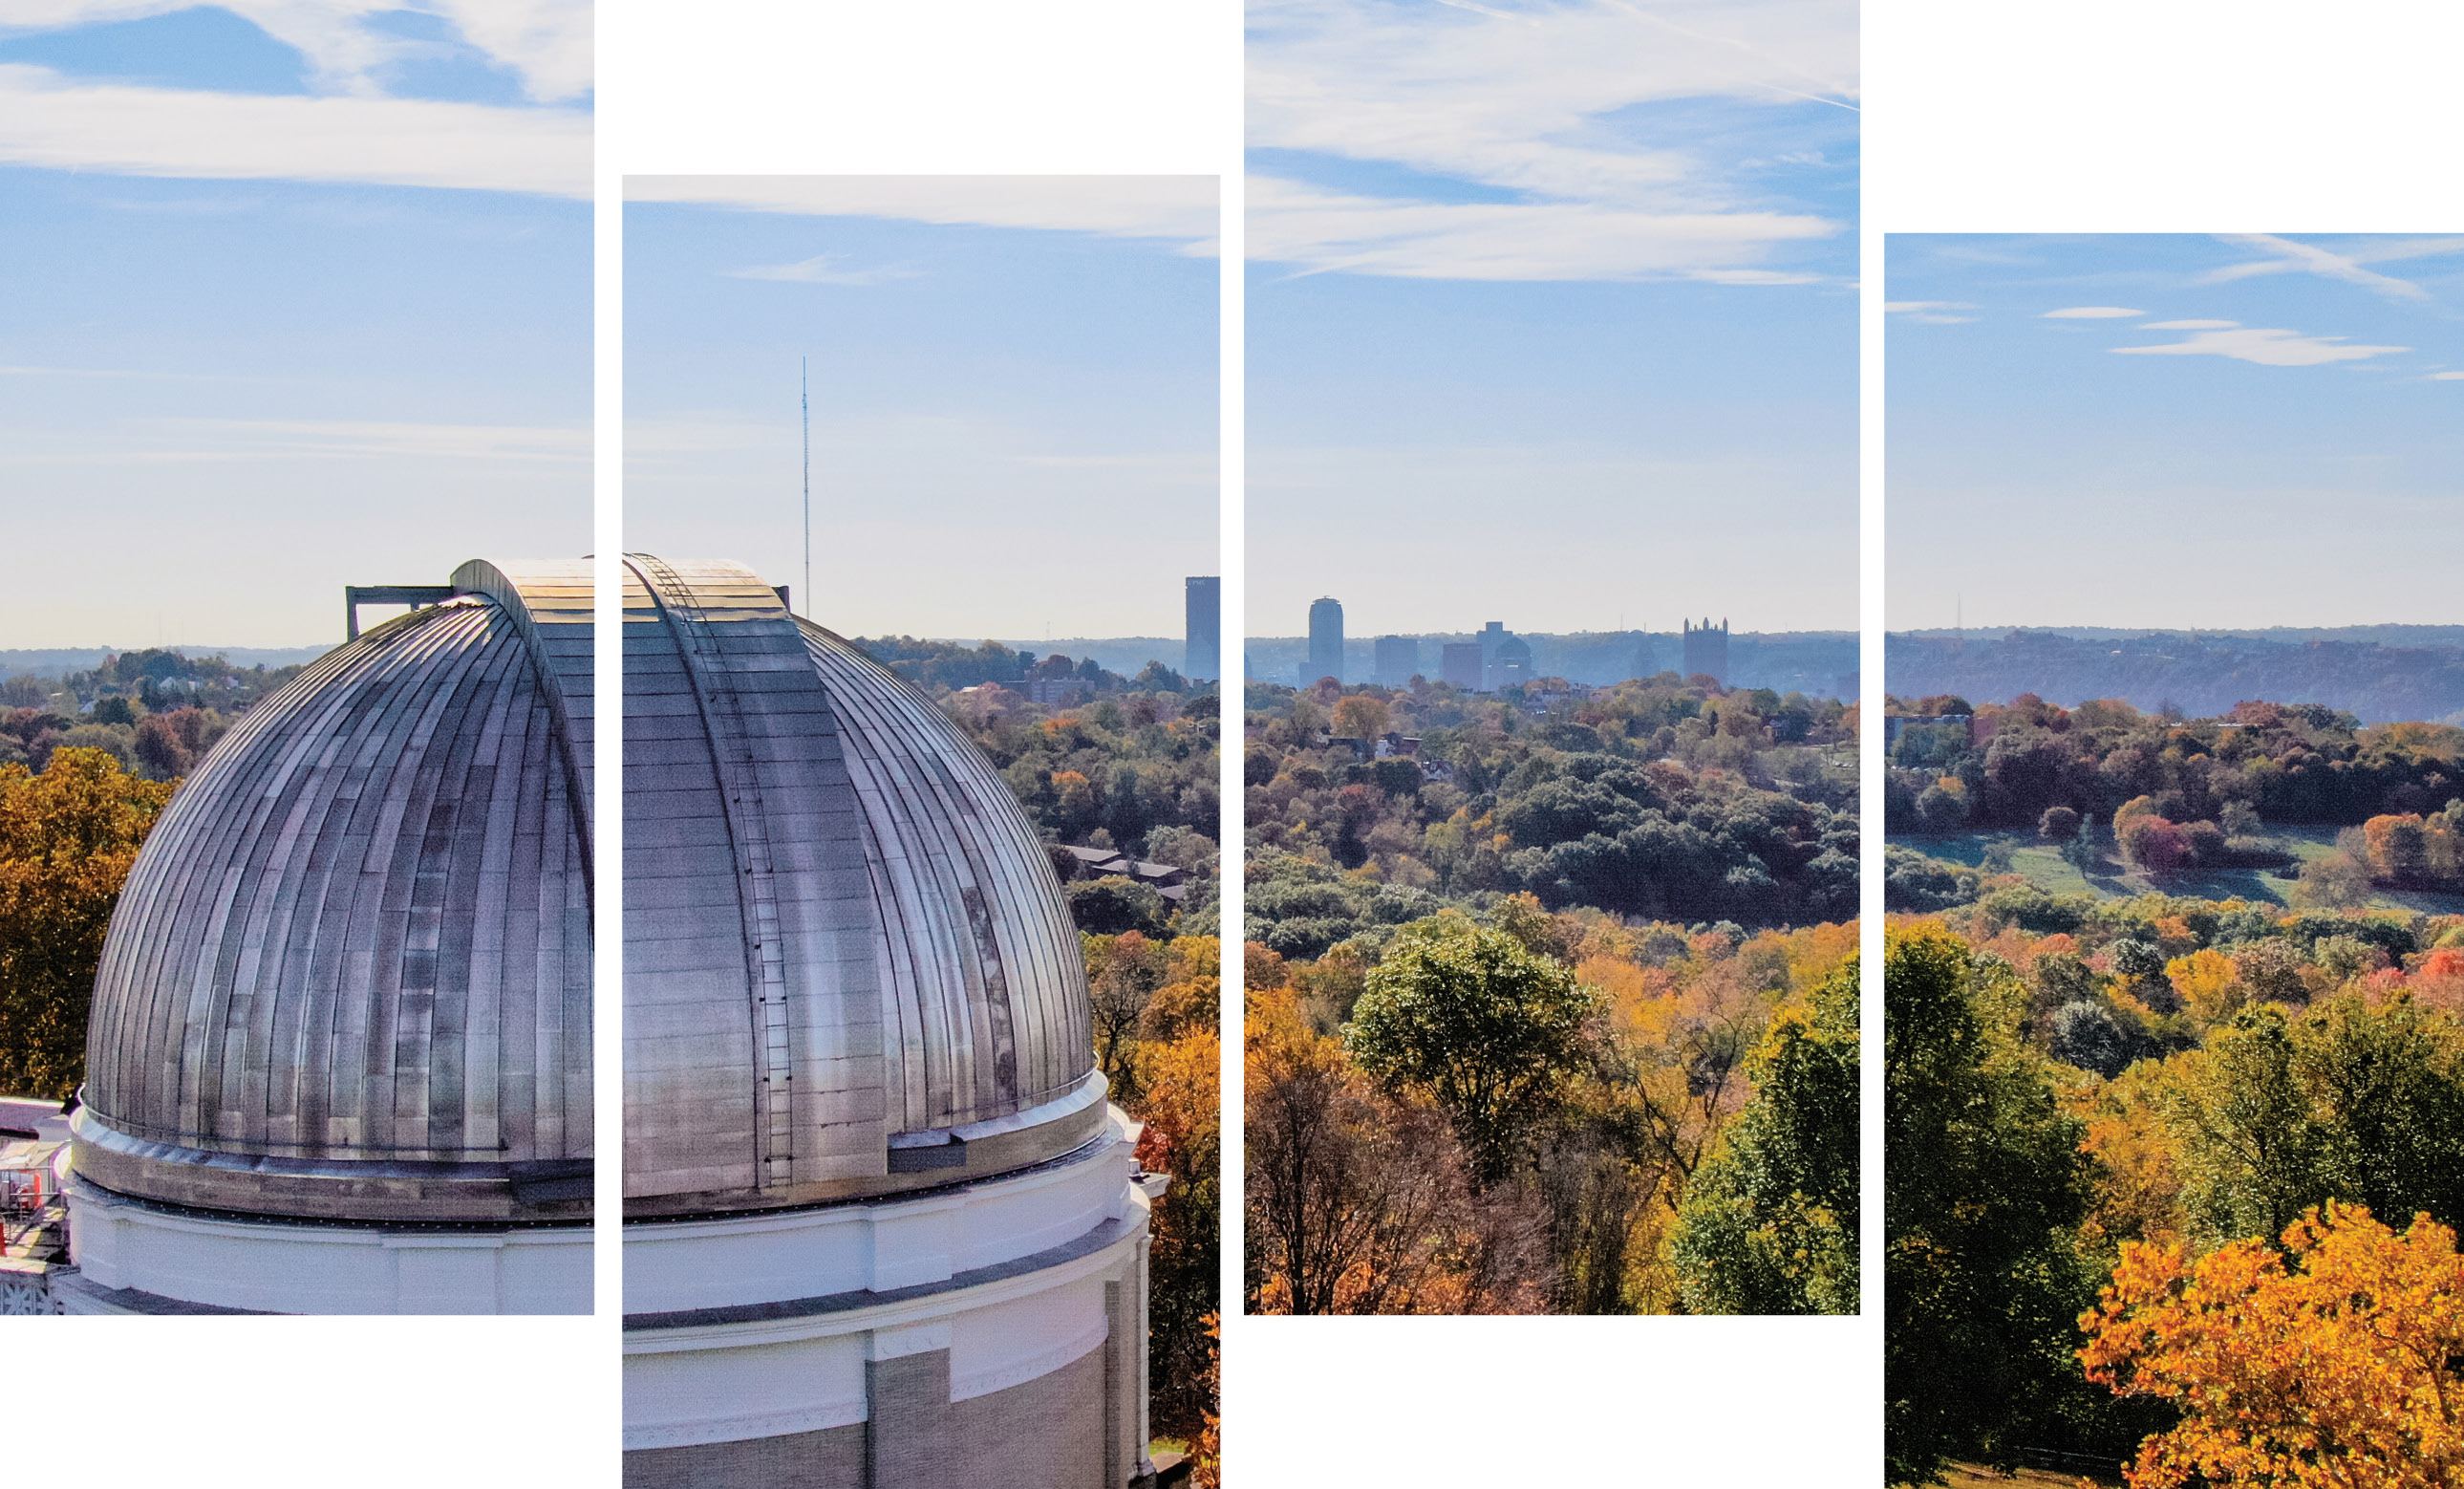 Roofing to the stars - Kalkreuth Roofing reroofs a dome on Allegheny Observatory